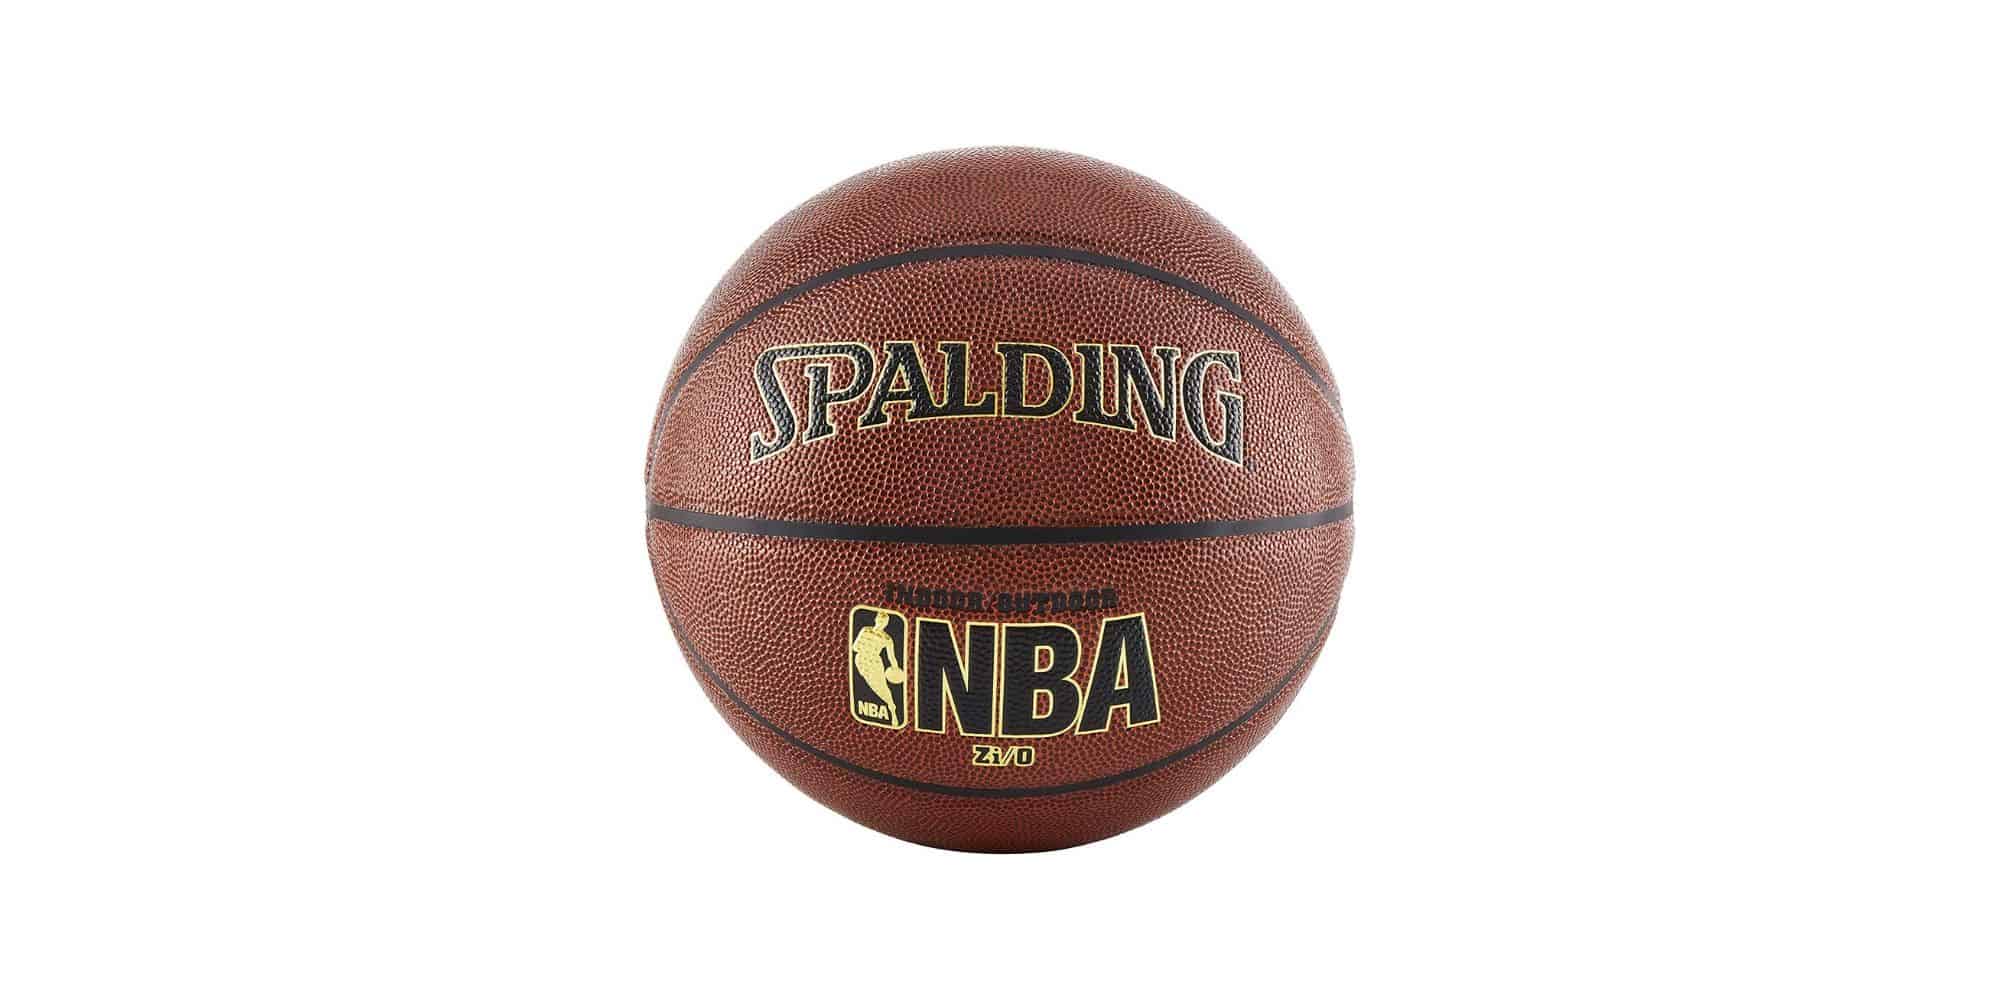 featured image for spalding zi/o basketball review